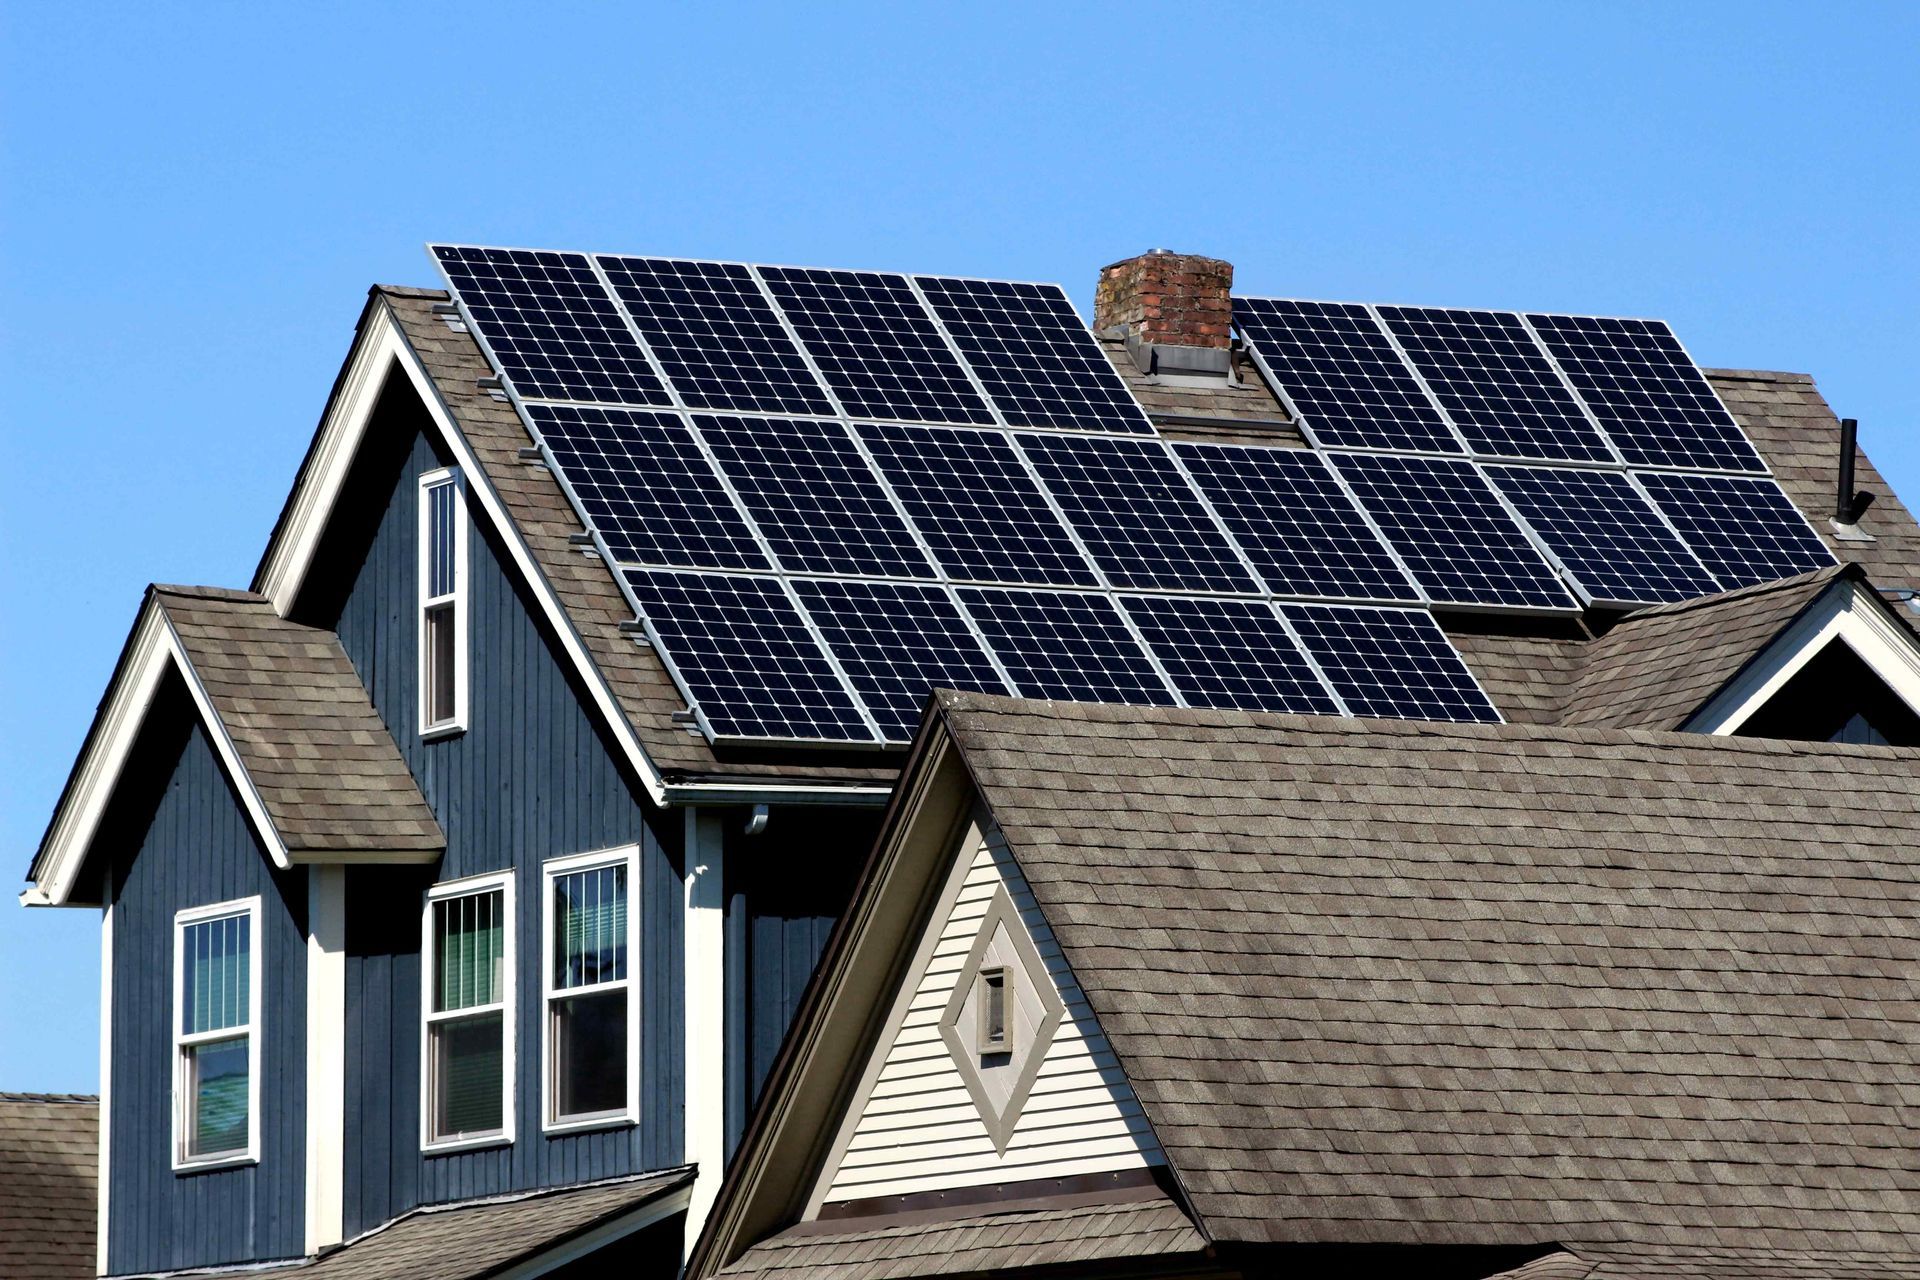 Solar panels on top of a house in St. Louis Missouri.